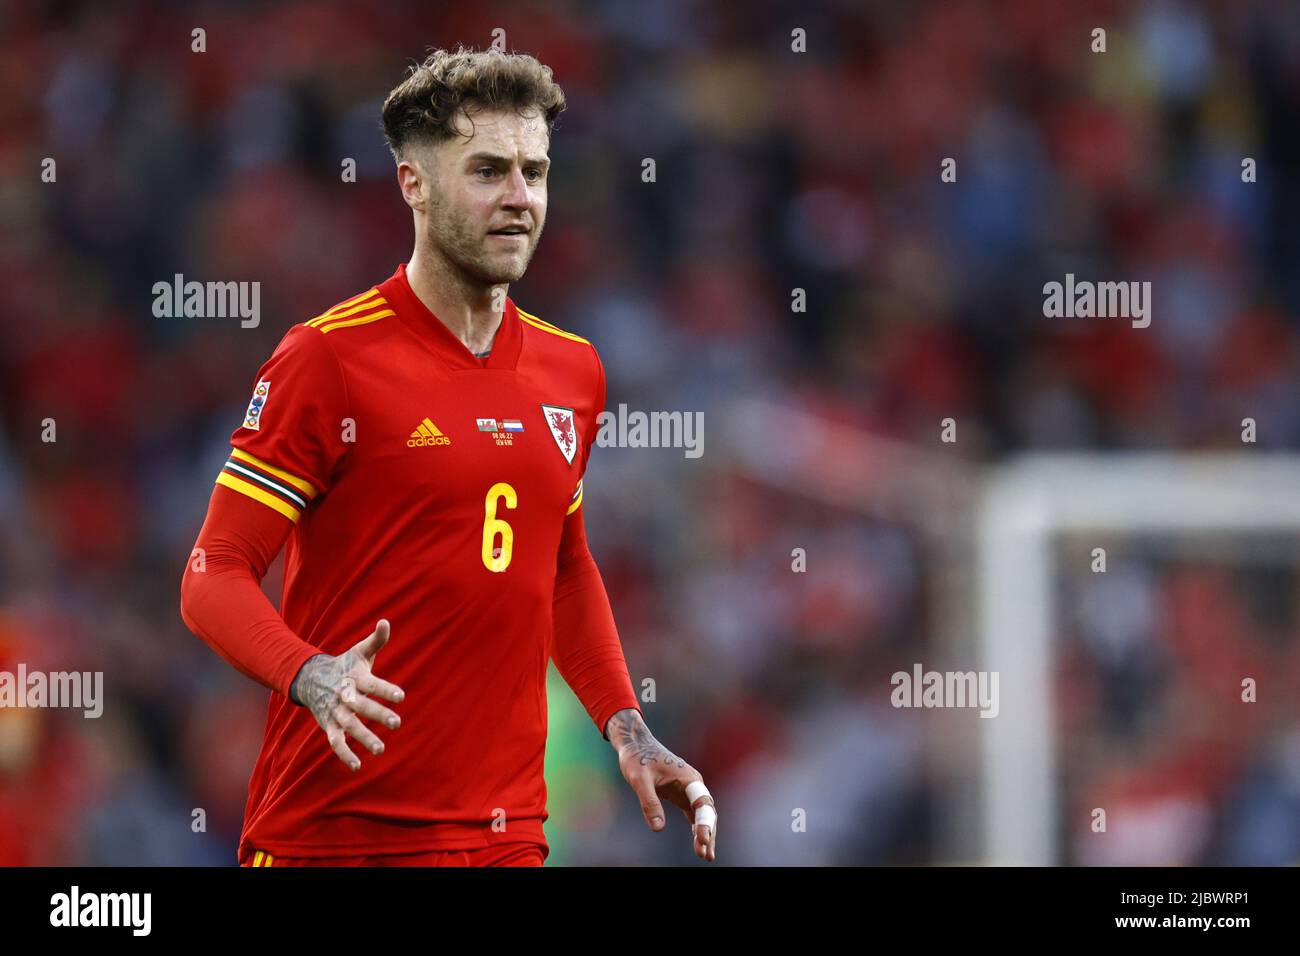 CARDIFF - Joseph Peter Rodon of Wales during the UEFA Nations League match between Wales and the Netherlands at Cardiff City Stadium on June 8, 2022 in Cardiff, Wales. ANP MAURICE VAN STEEN Stock Photo